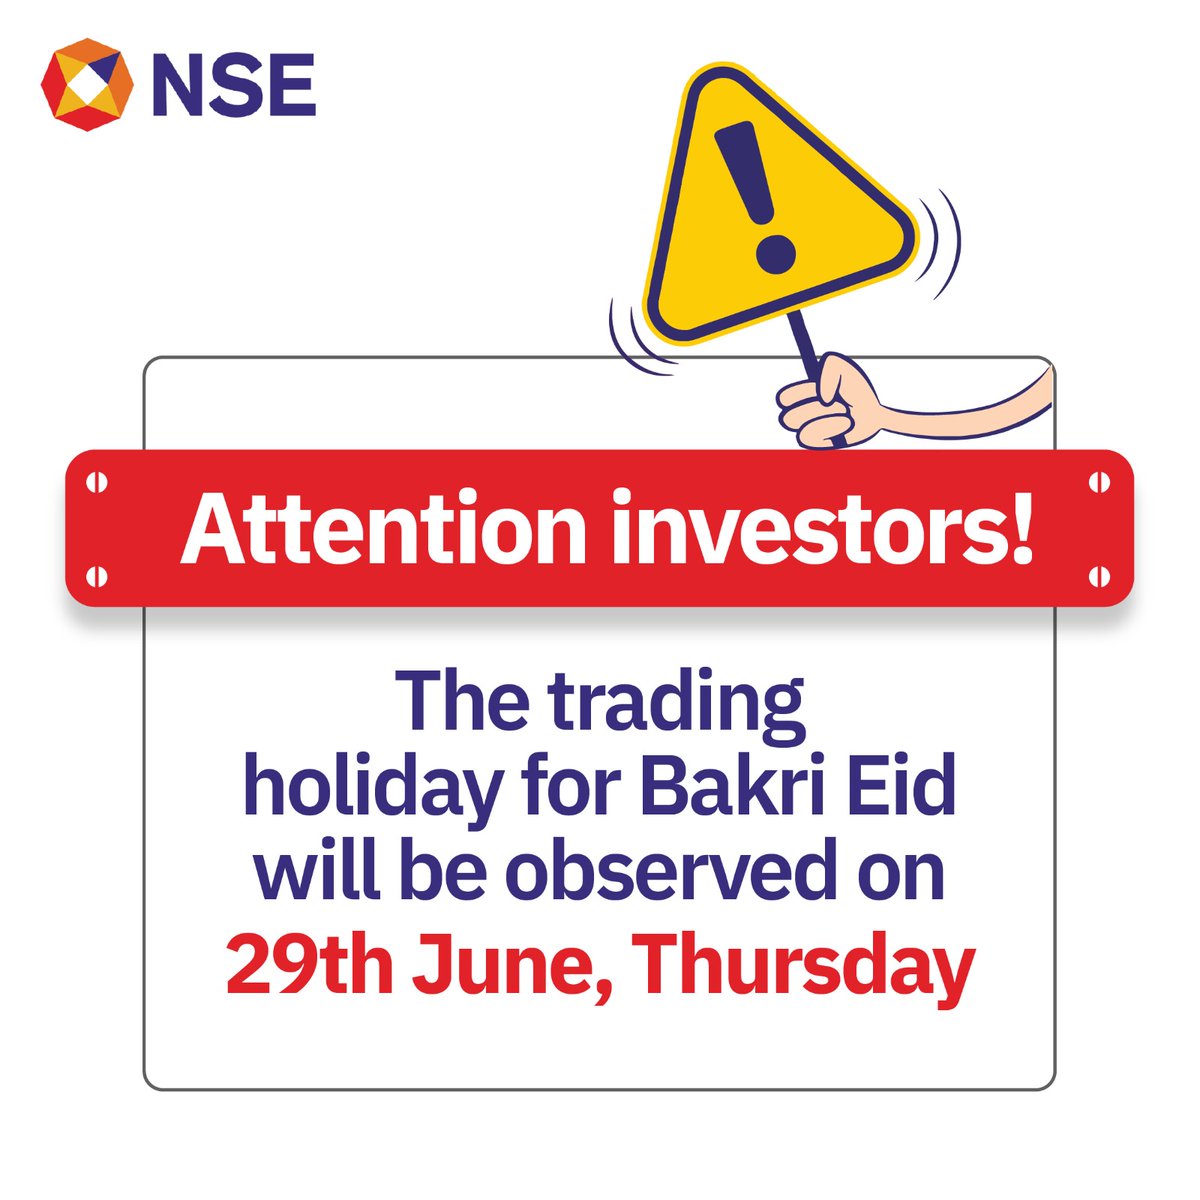 Attention investors! The trading holiday for Bakri Eid will be observed on 29th June, Thursday. 
Know more: nseindia.com/resources/exch…

#NSE #NSEIndia @ashishchauhan